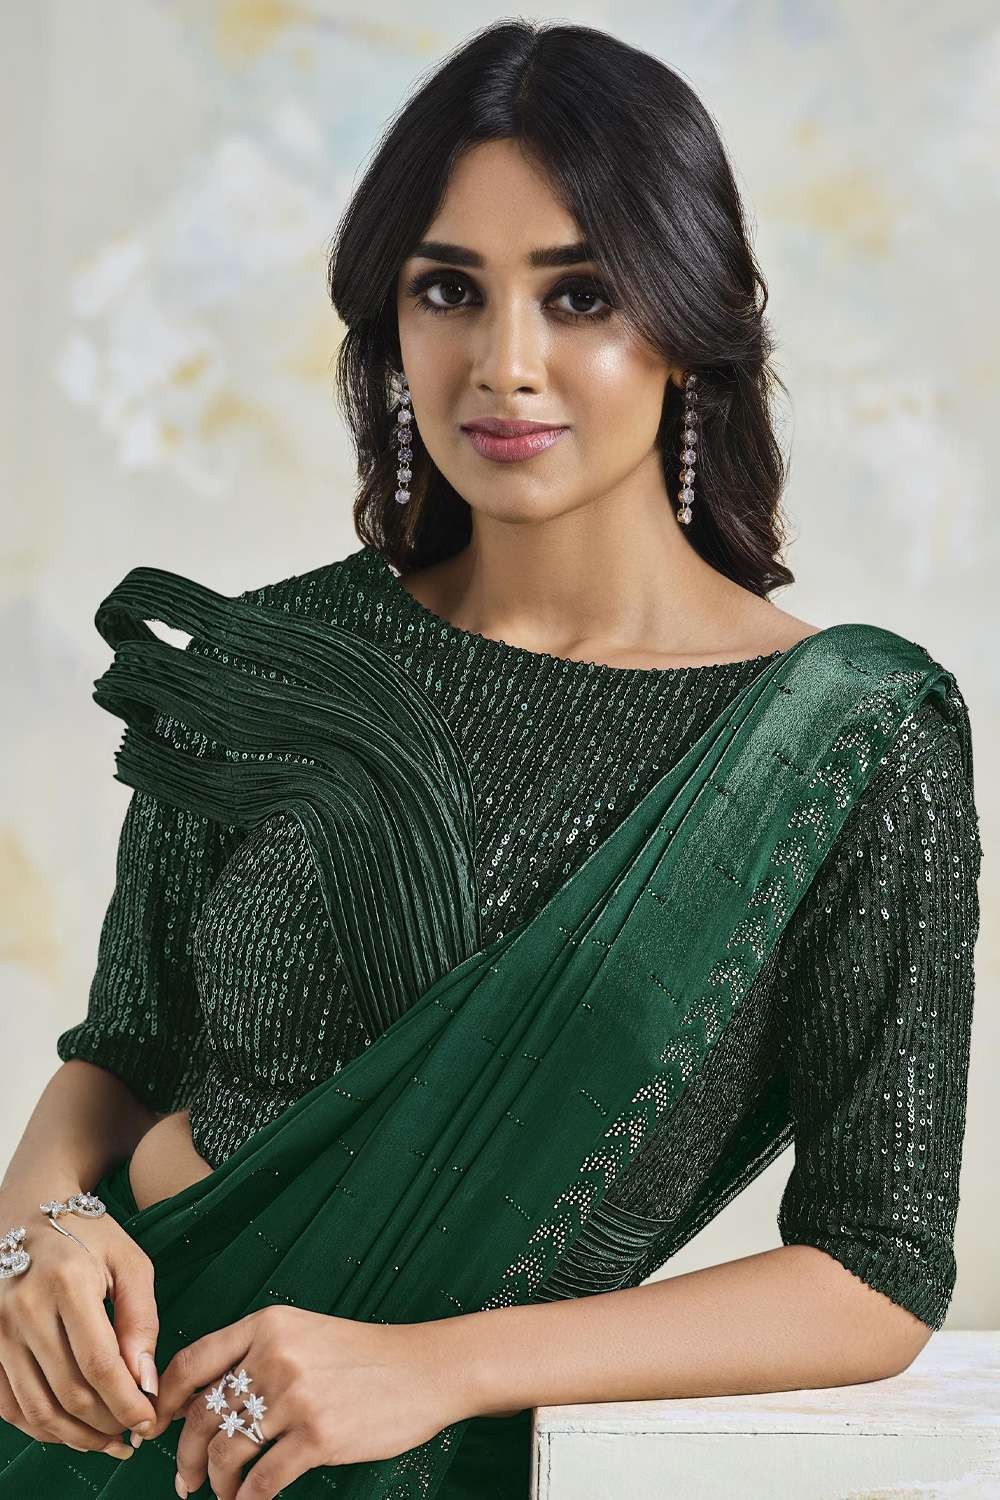 Embroidered Georgette Party Wear Saree in Green with Blouse - SR23293